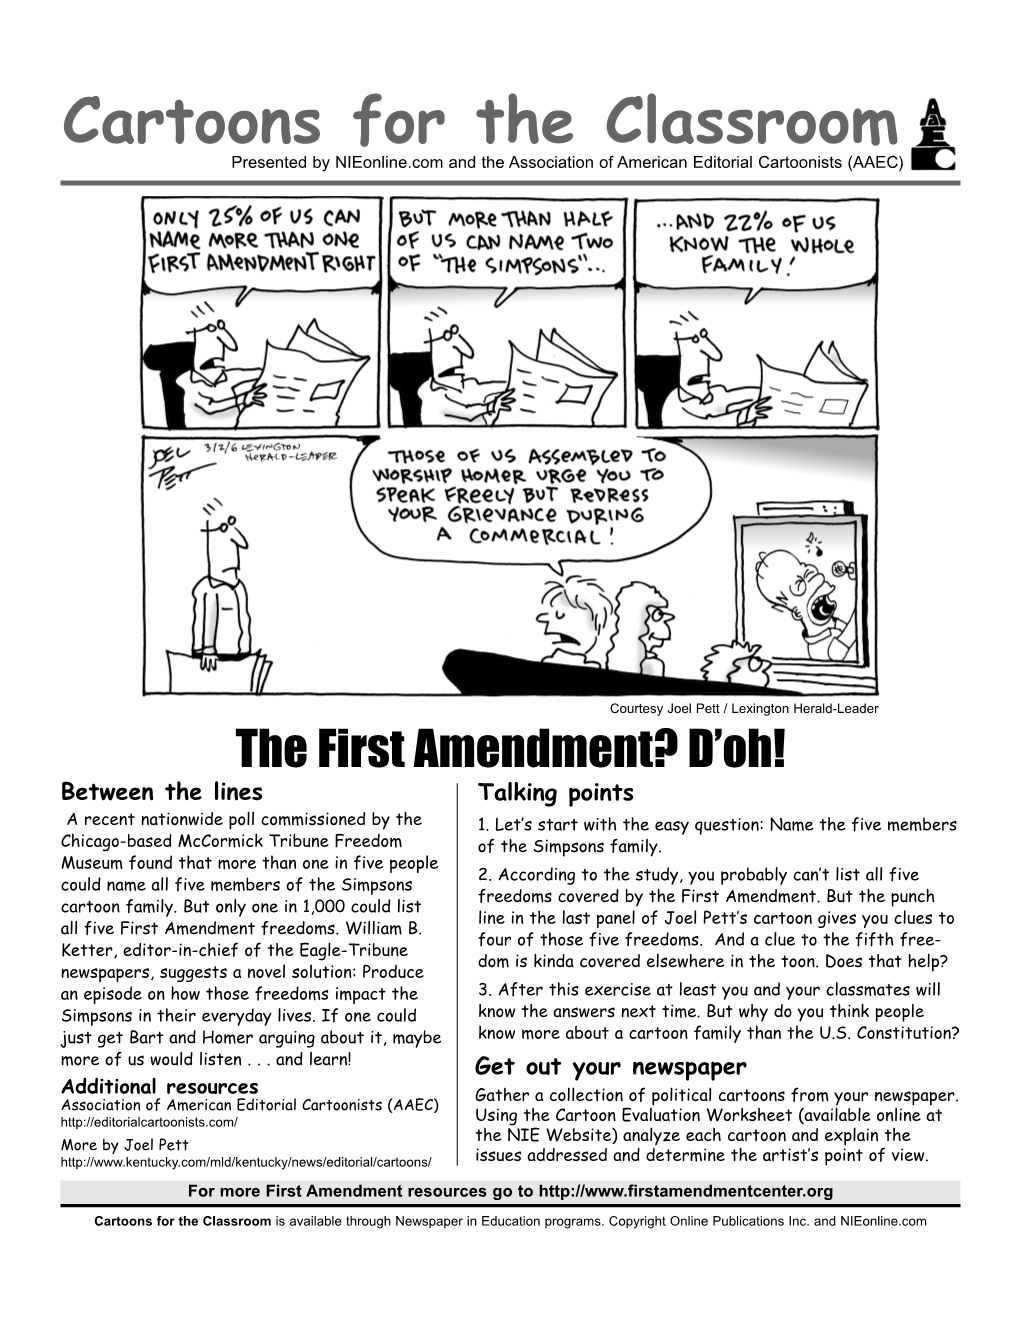 The First Amendment? D’Oh! Between the Lines Talking Points a Recent Nationwide Poll Commissioned by the 1